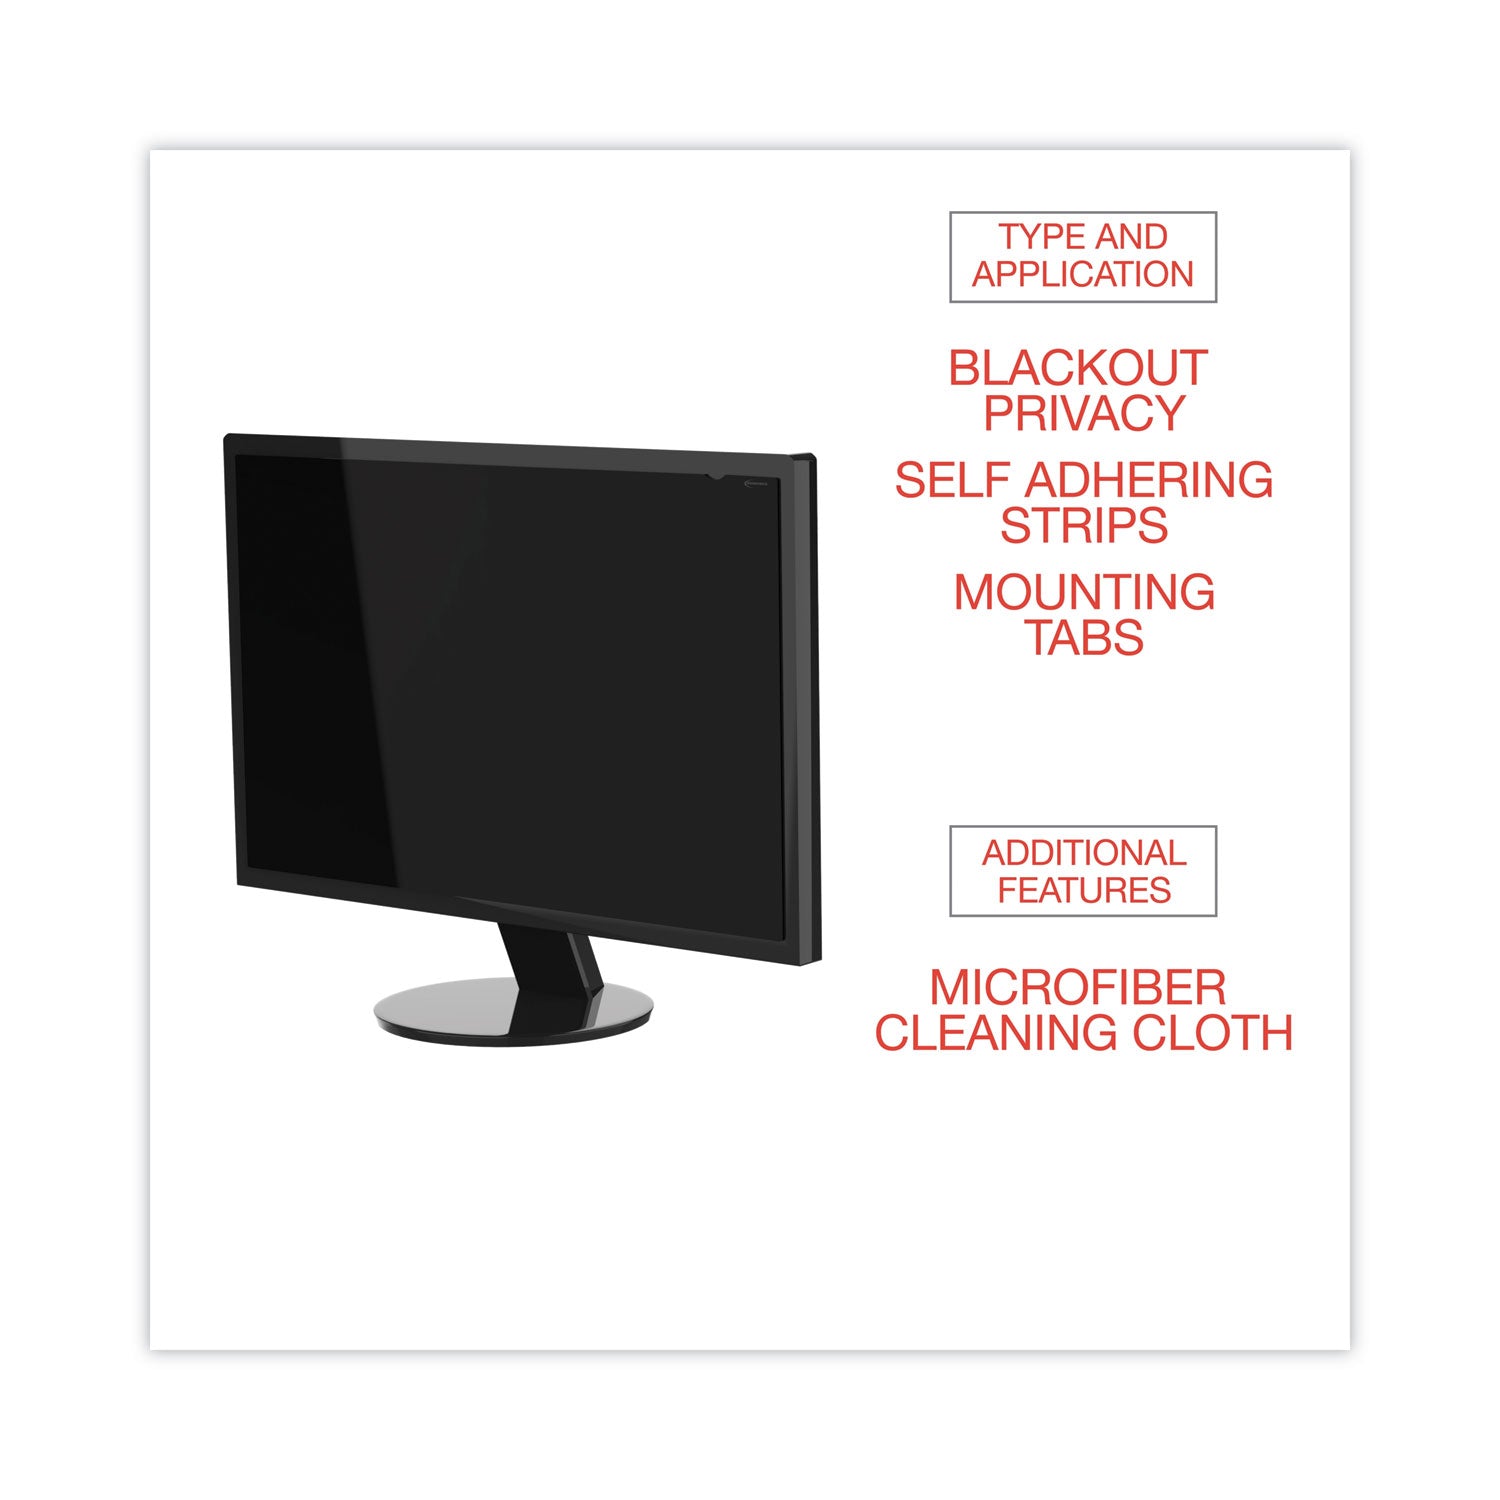 blackout-privacy-filter-for-30-widescreen-flat-panel-monitor-1610-aspect-ratio_ivrblf30w - 6